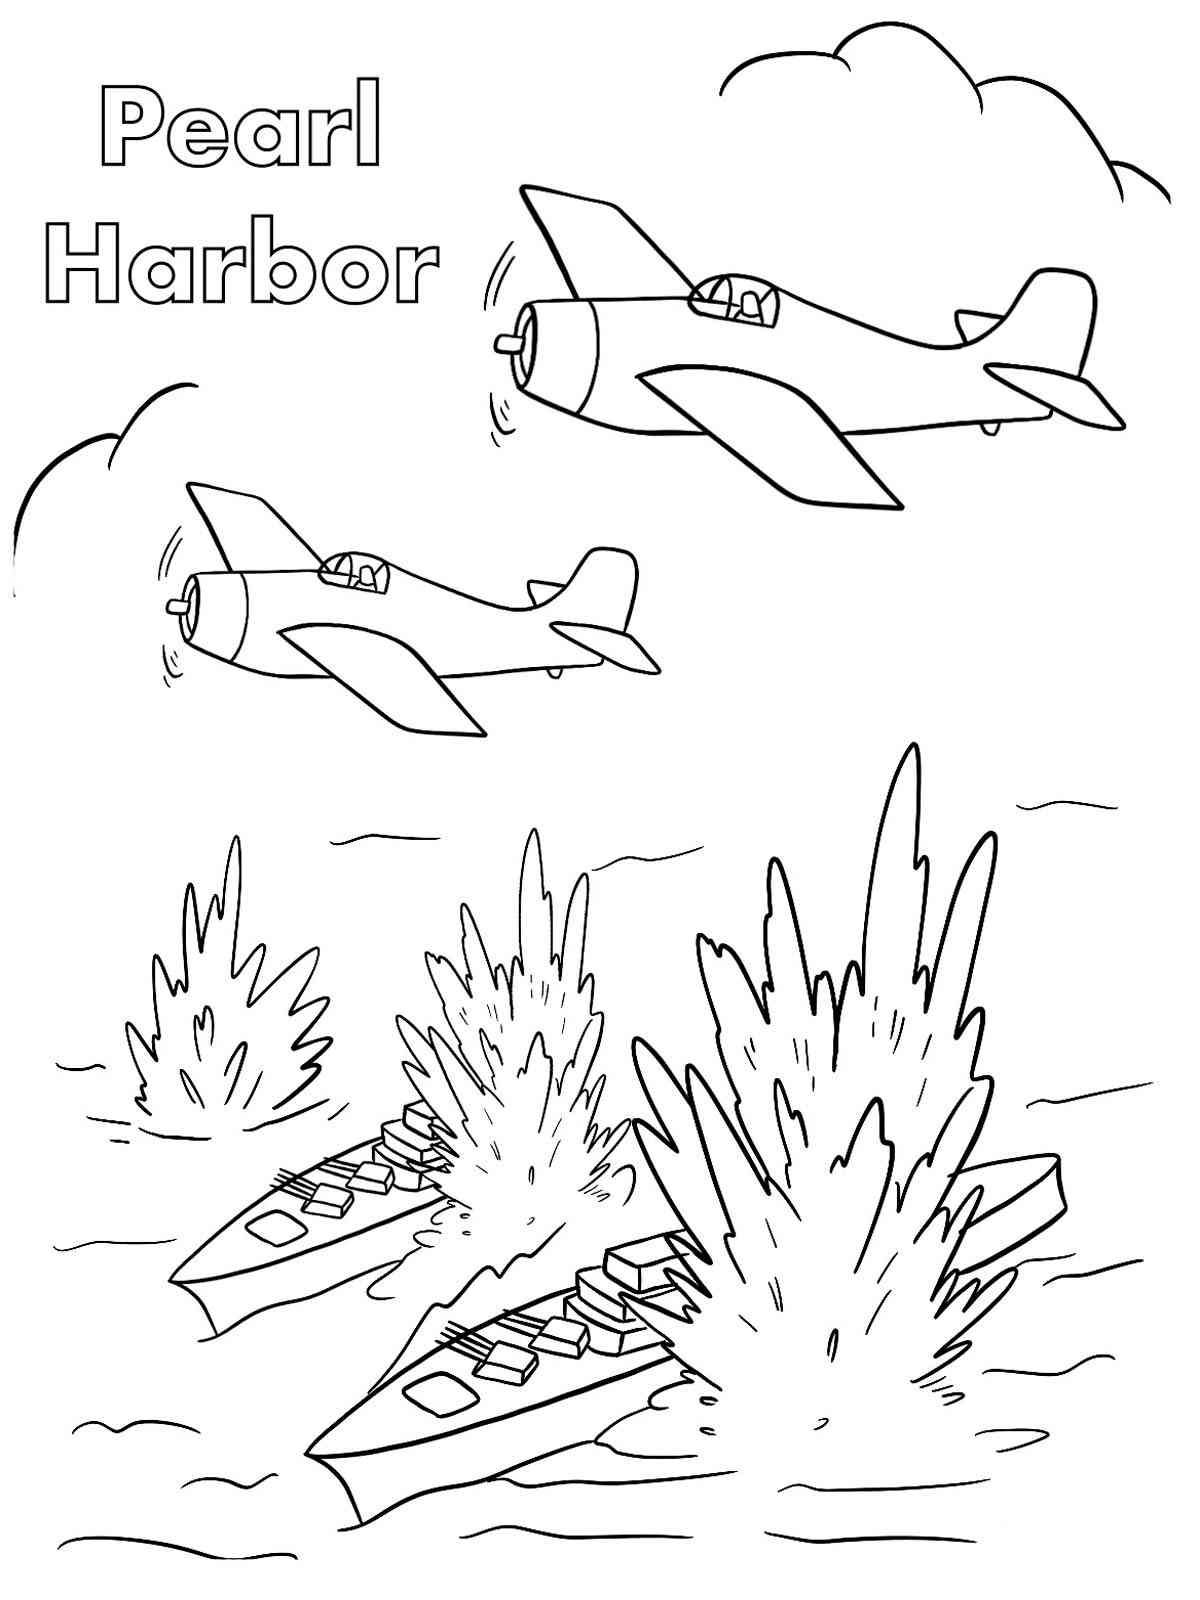 Pearl harbor day coloring page